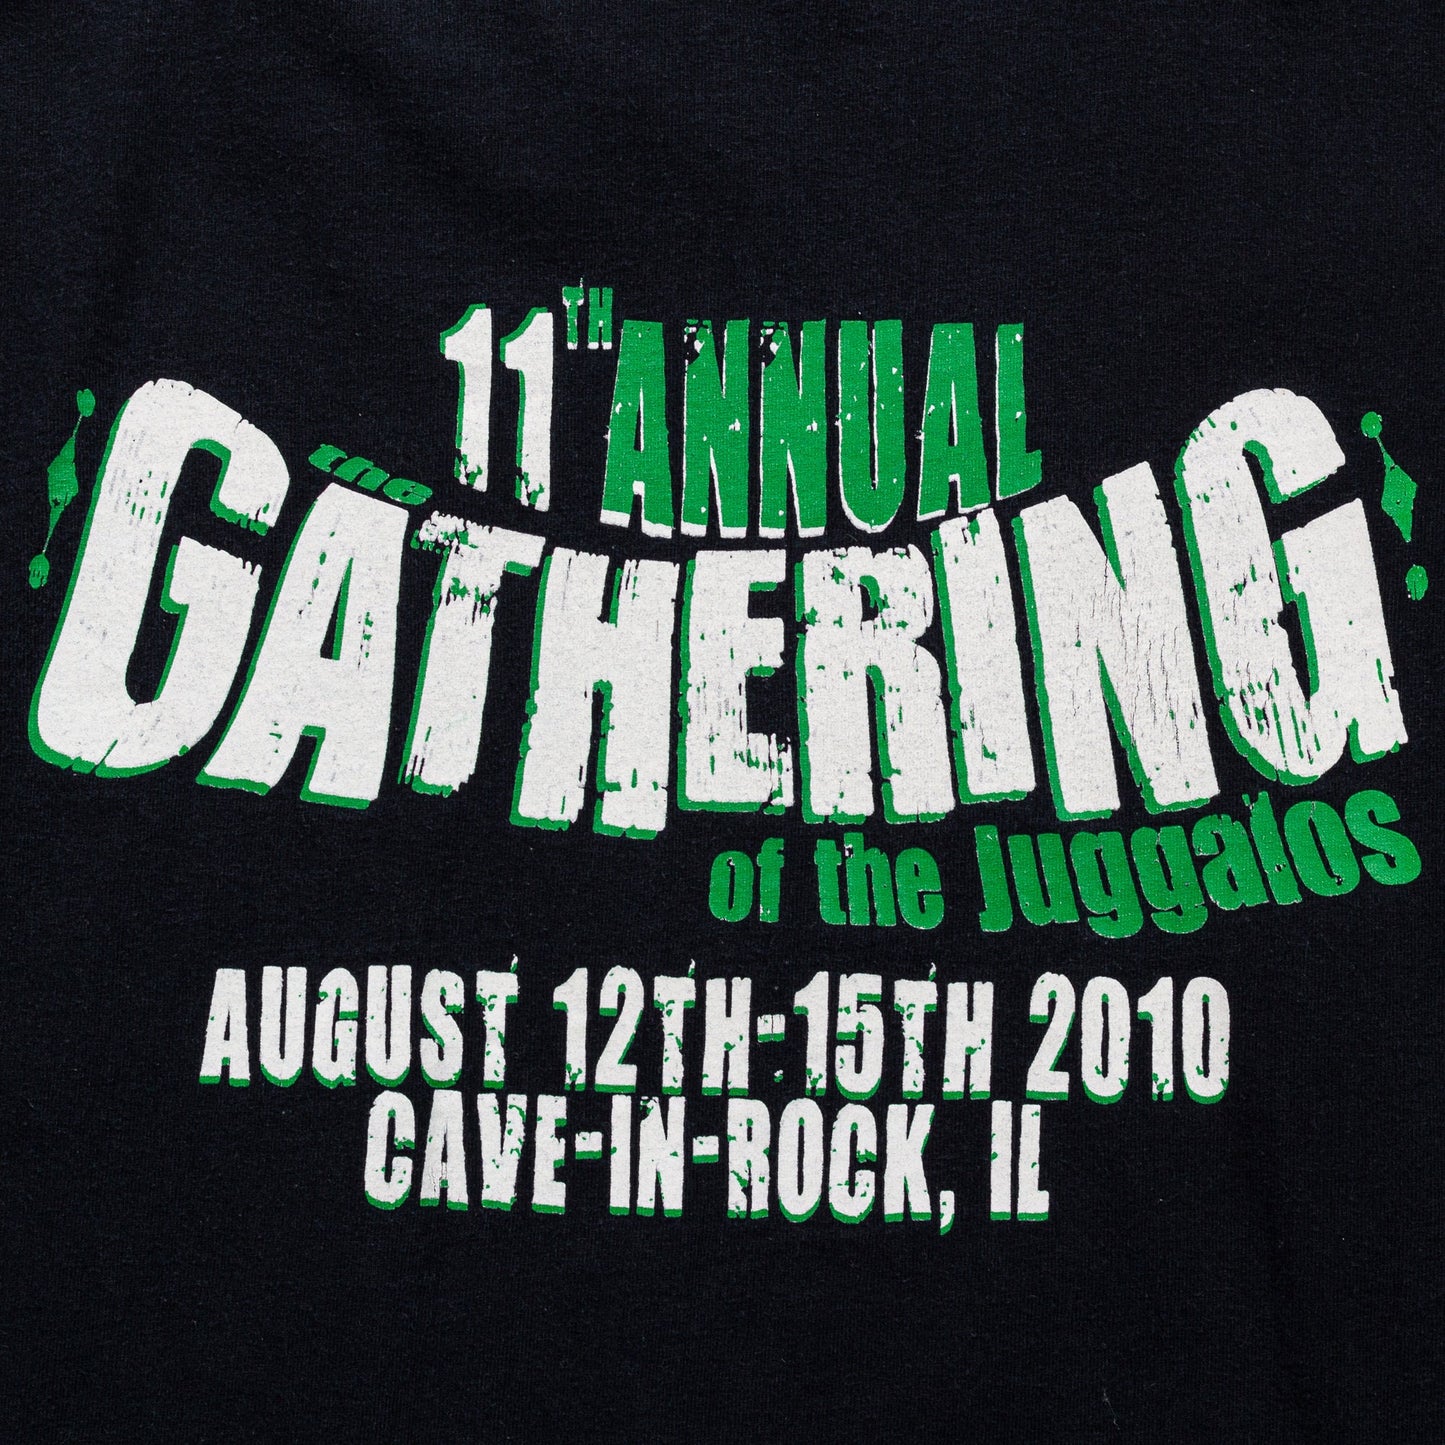 Vintage Gathering Of The Juggalos T Shirt - Unisex 3XL 